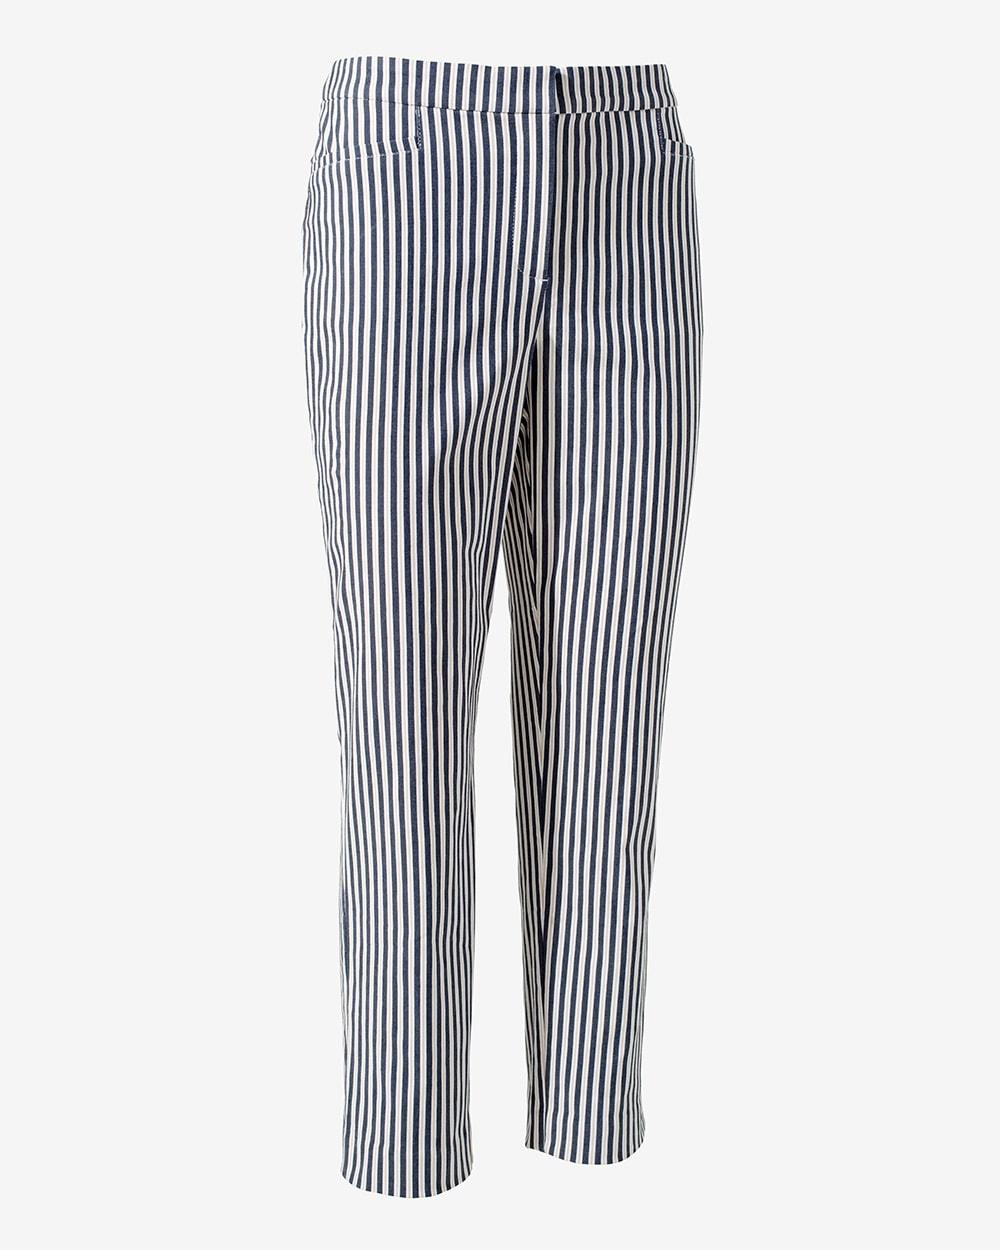 Fabulously Slimming Striped Ankle Trouser Pants